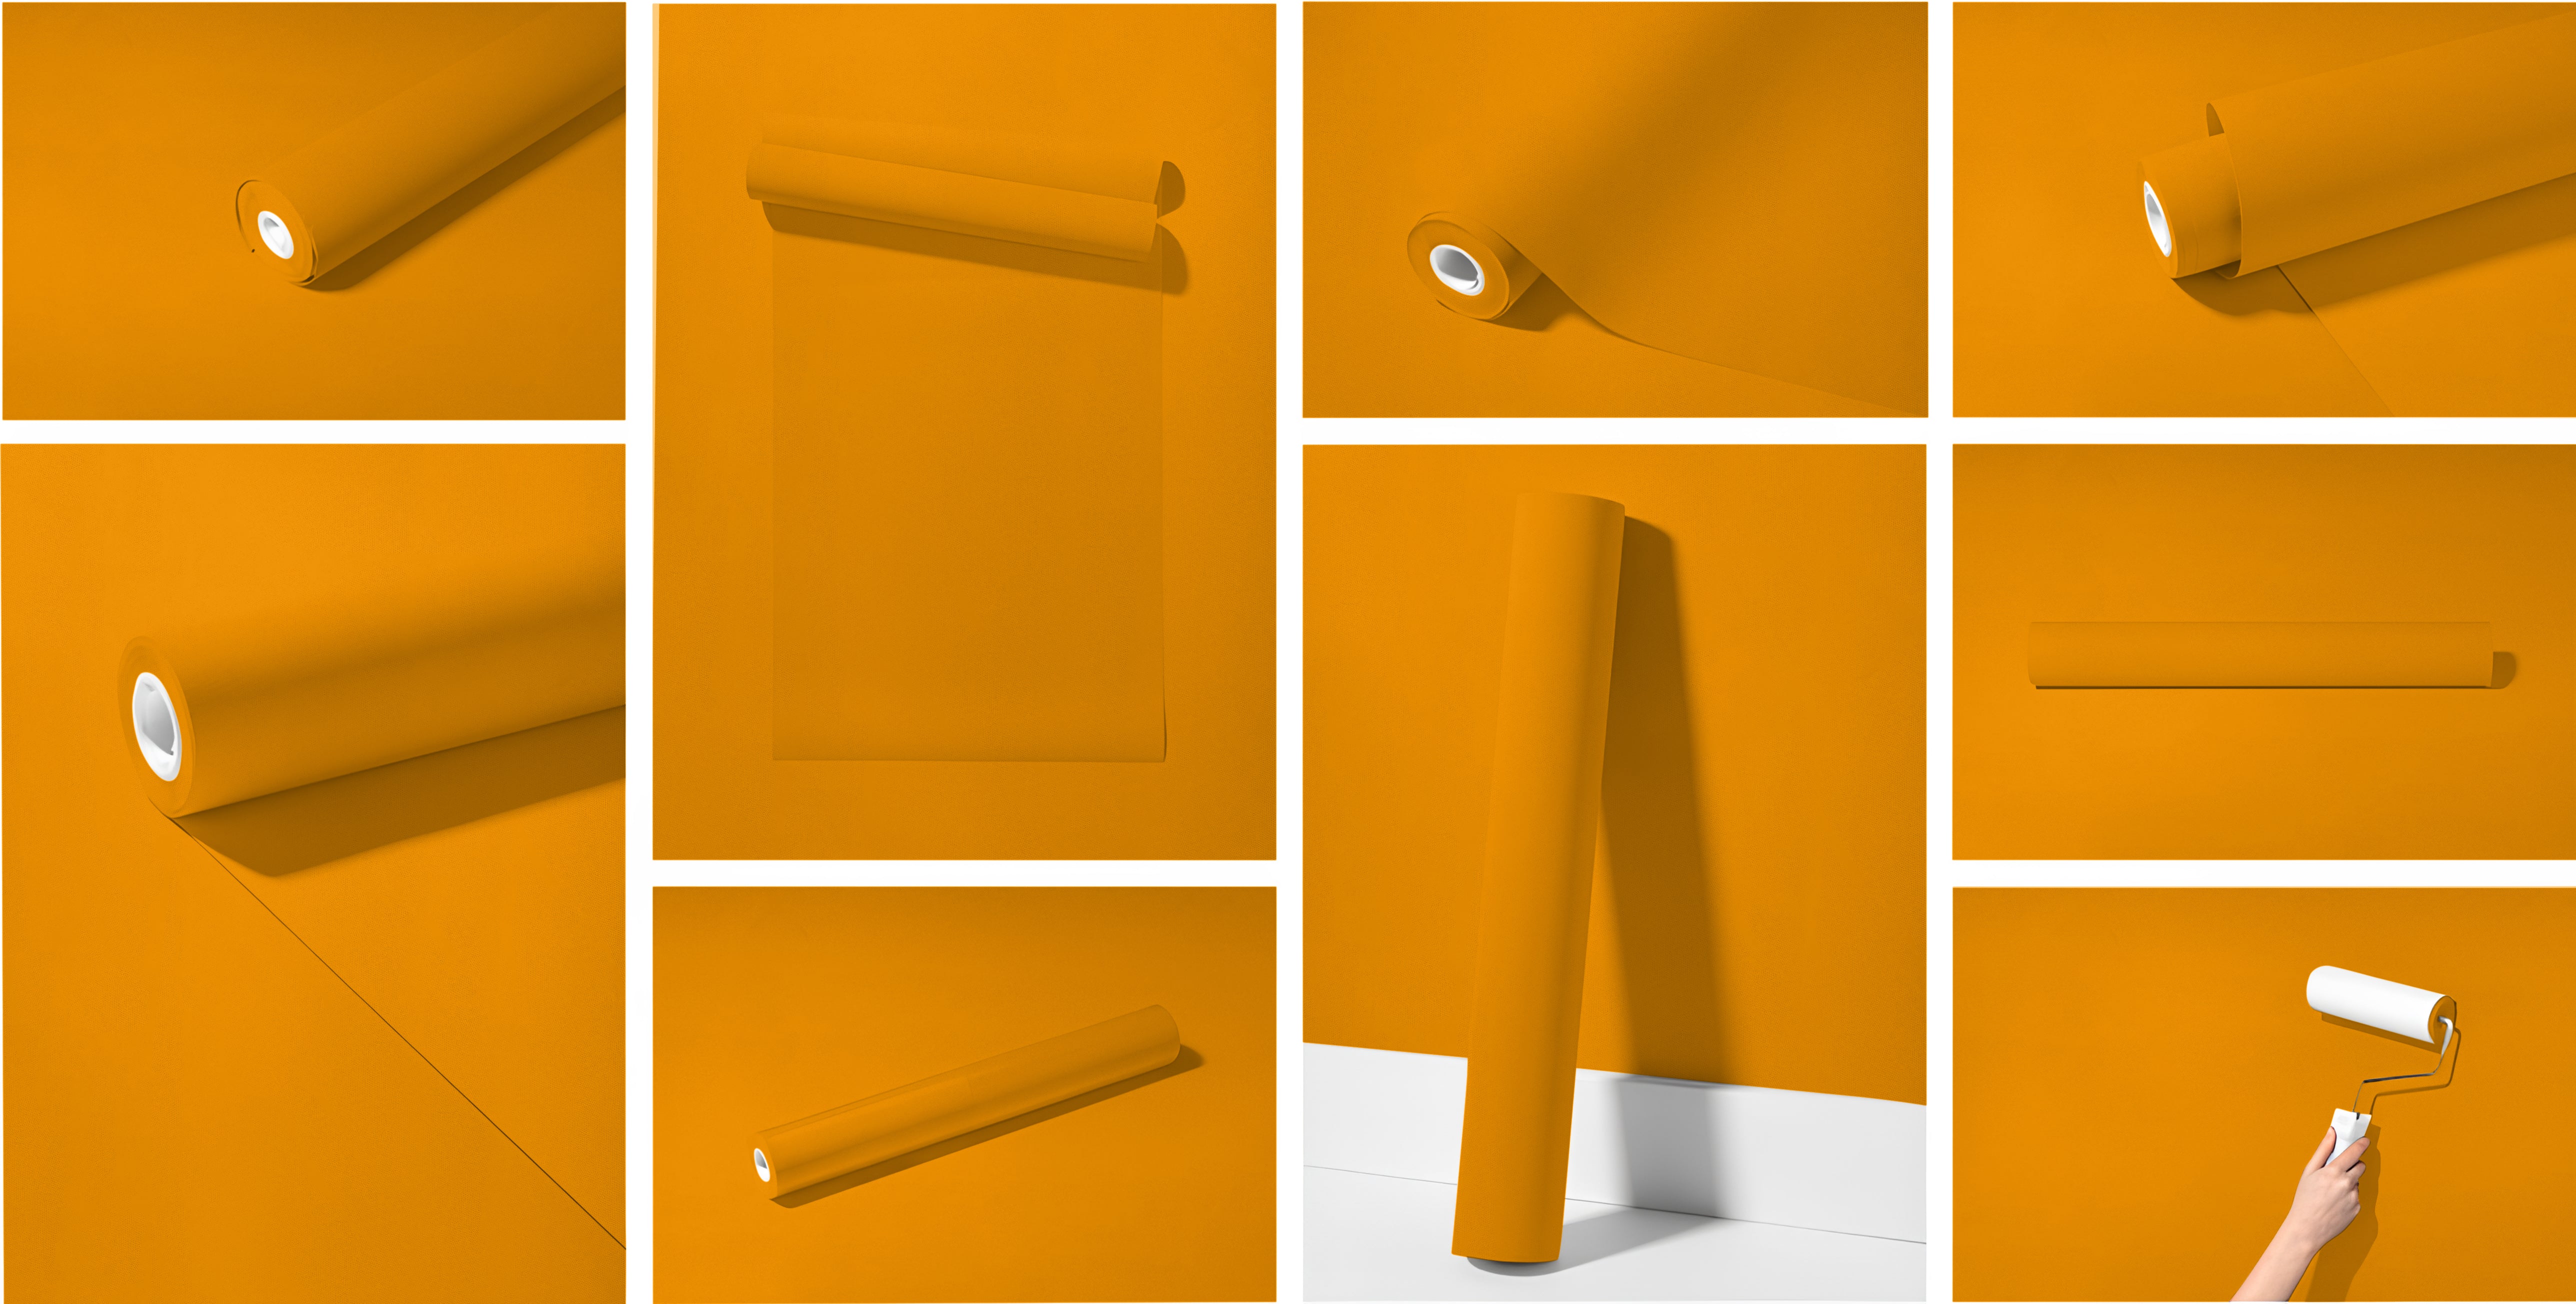 Peel & Stick Removable Re-usable Paint - Color RAL 1007 Daffodil Yellow - offRAL™ - RALRAW LLC, USA